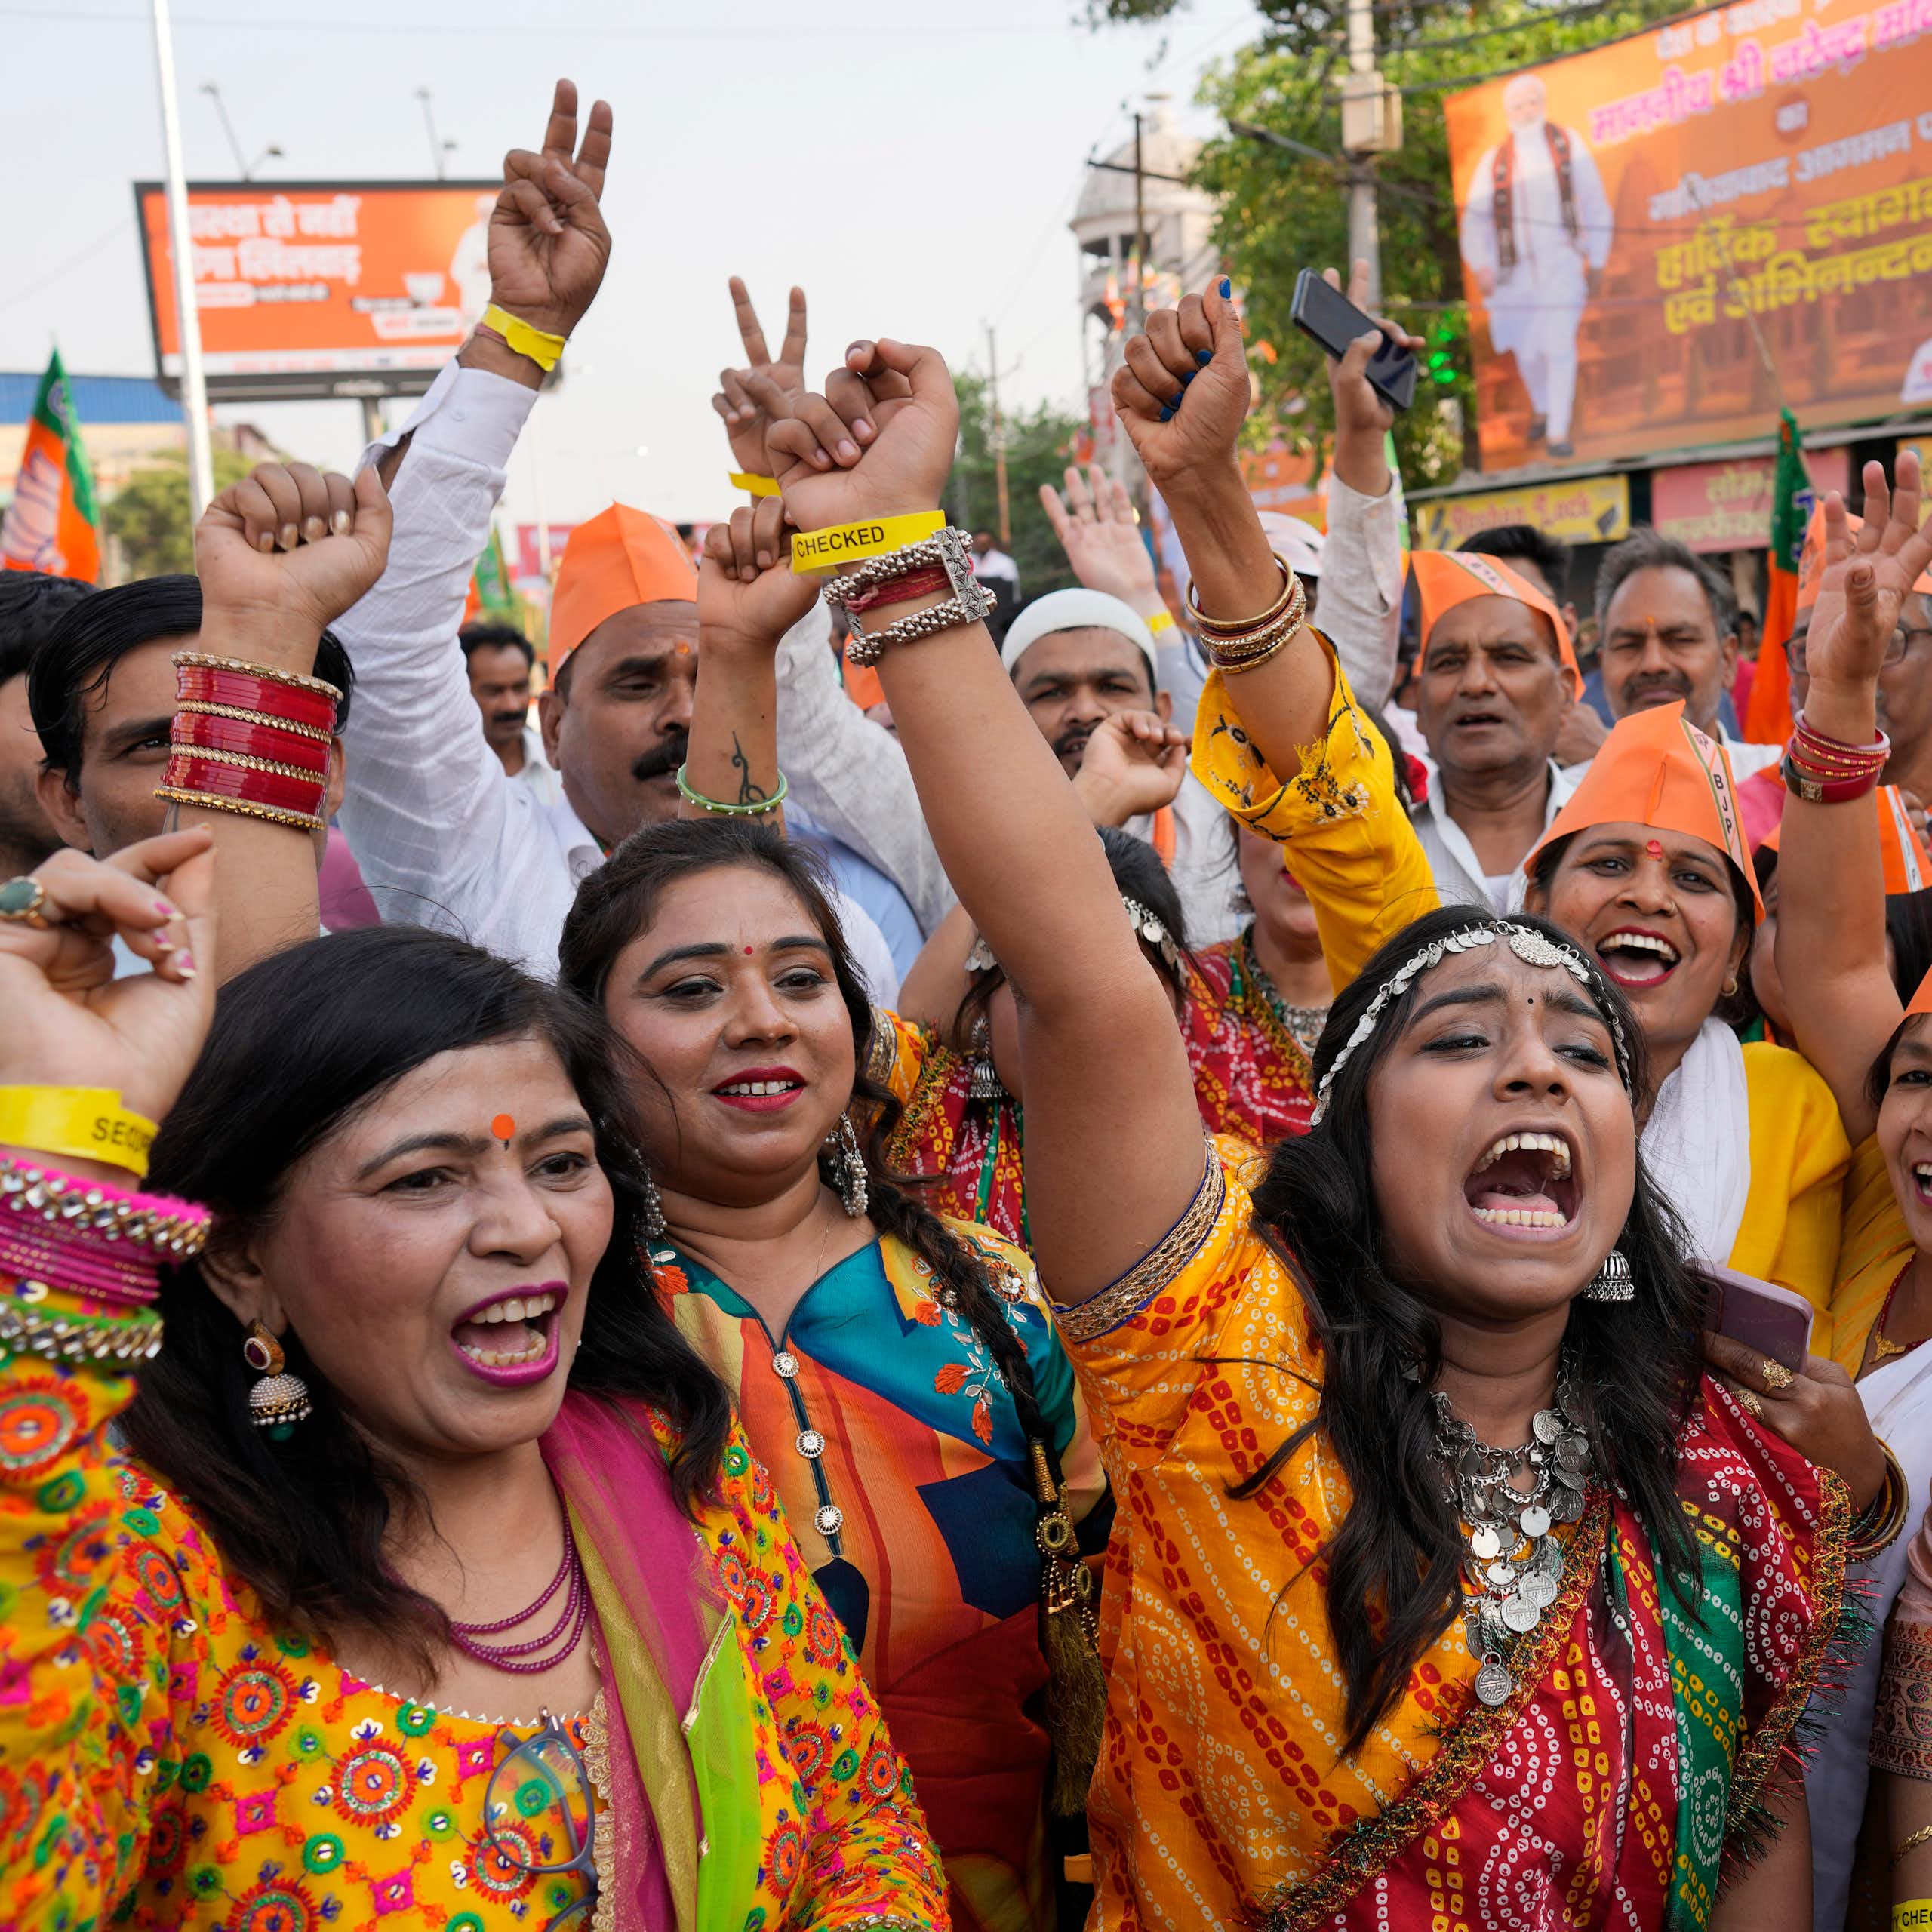 ‘We have thousands of Modis’: the secret behind the BJP’s enduring success in India